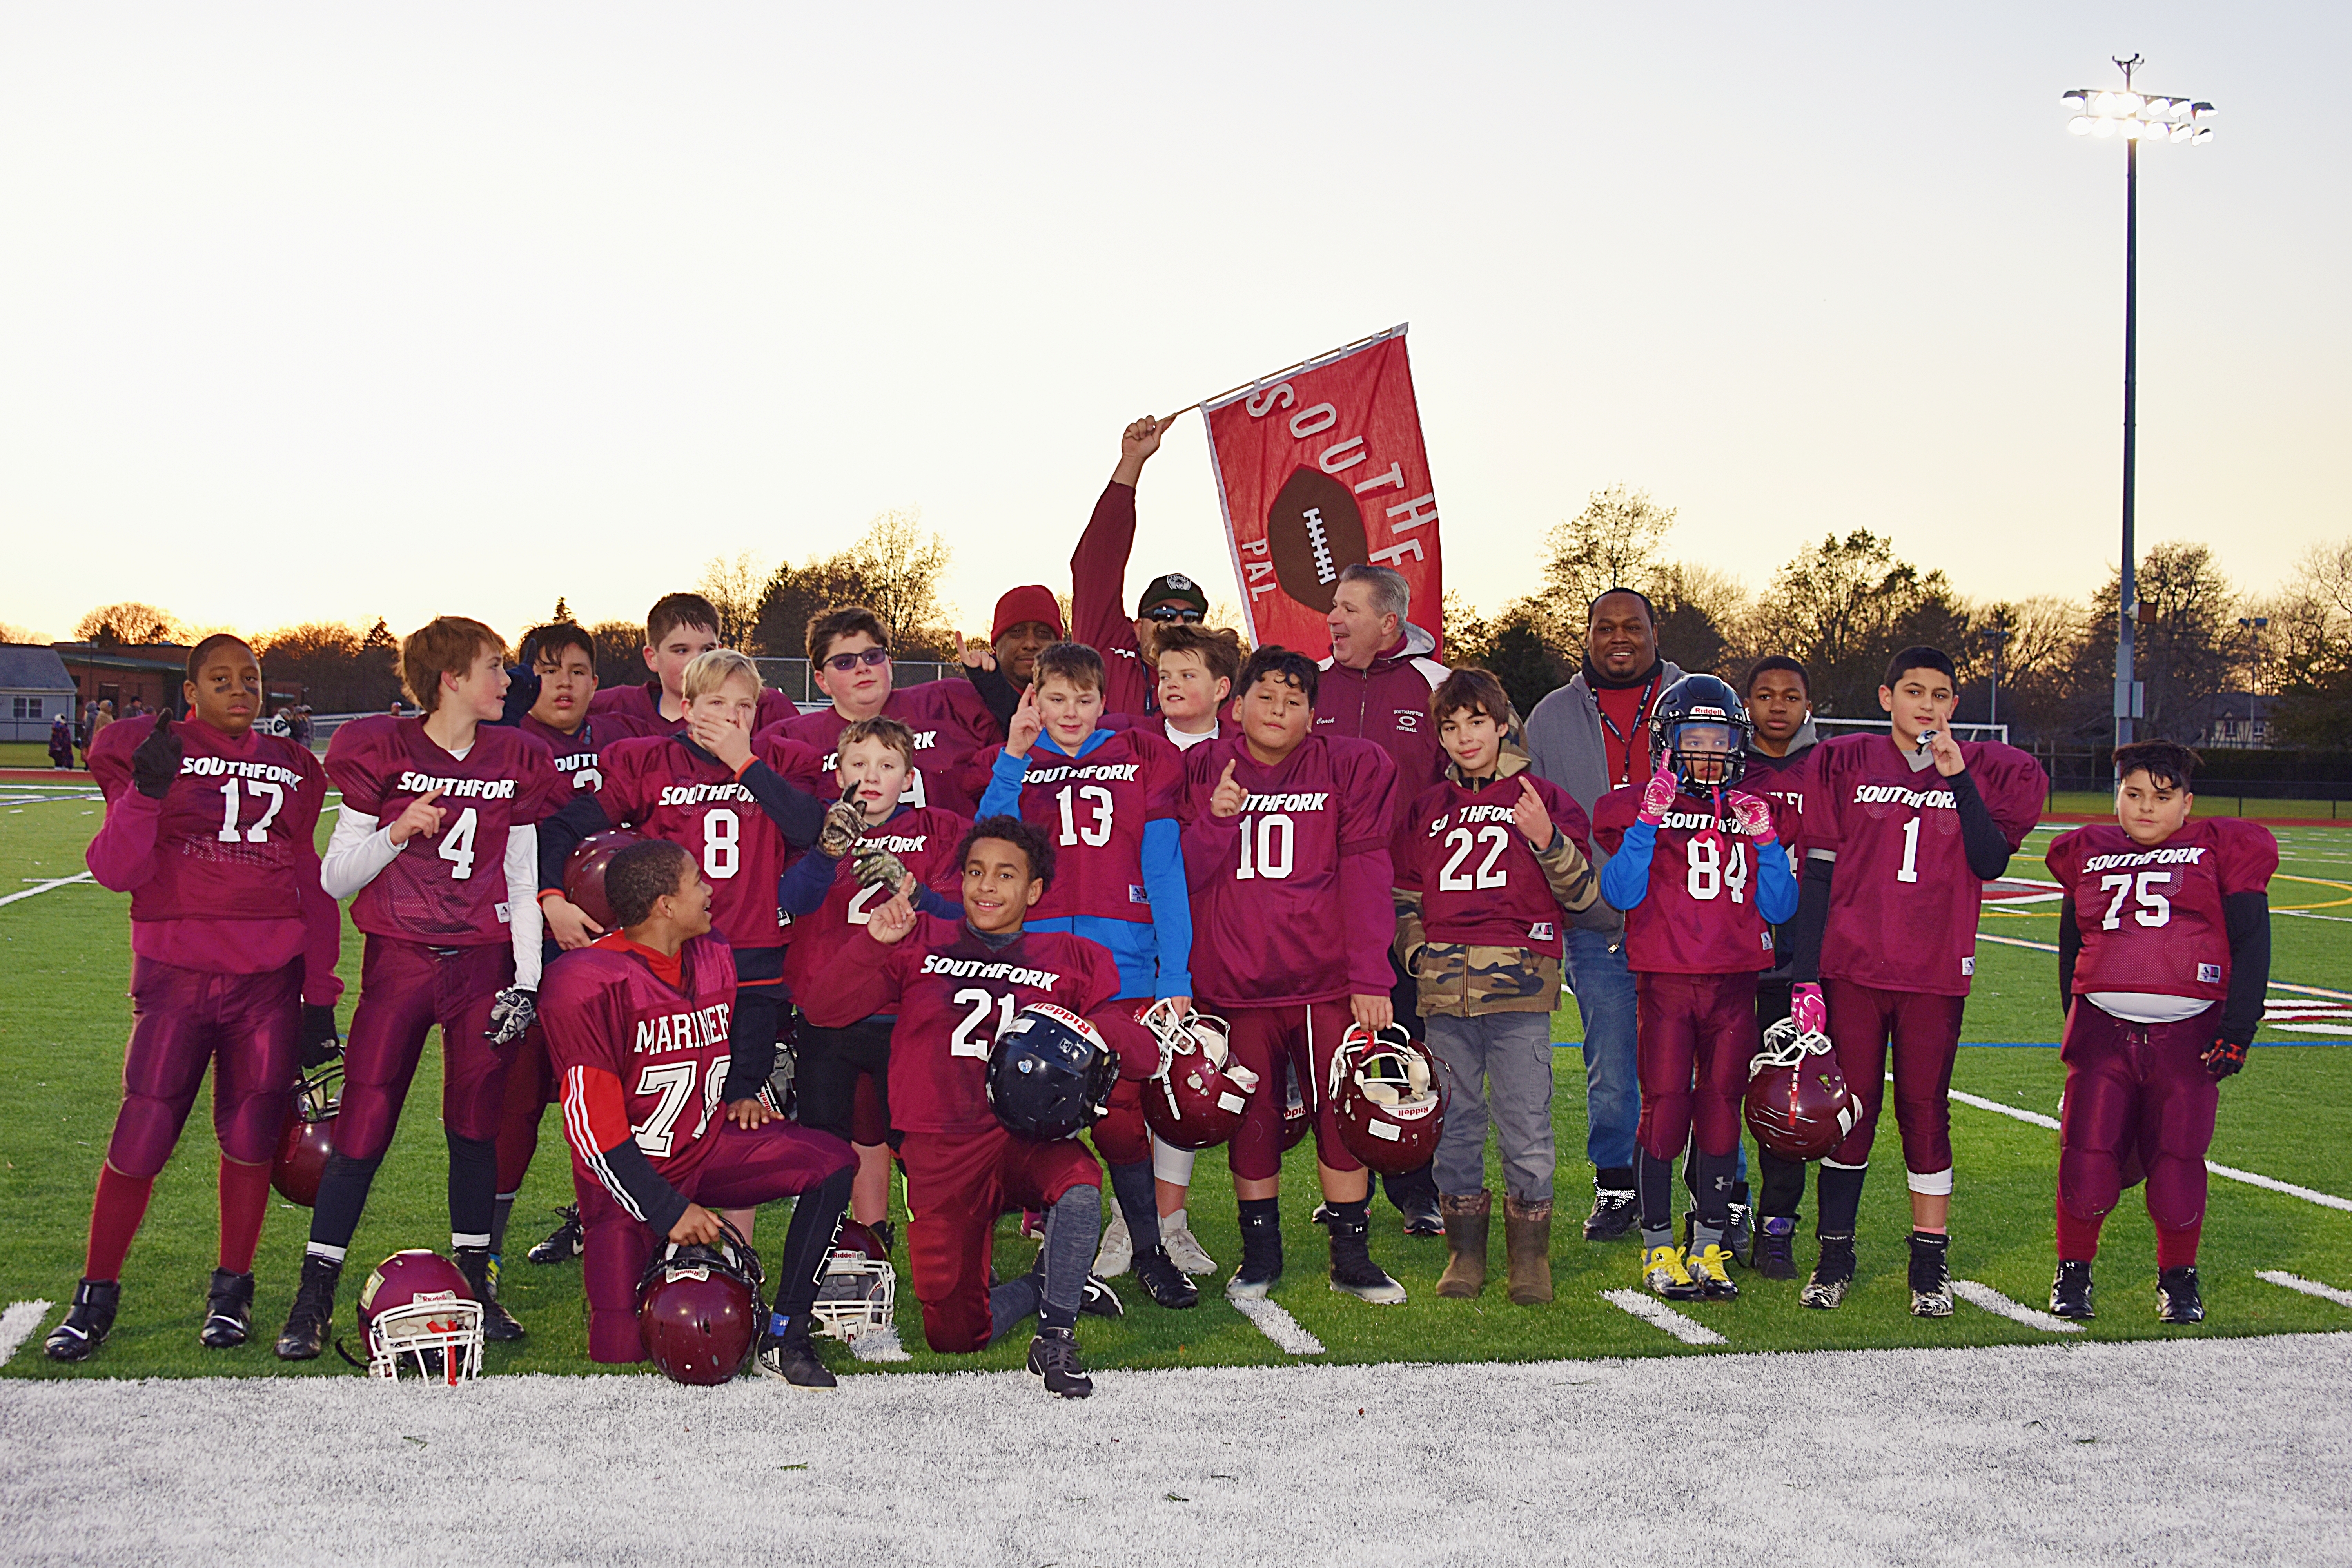 The South Fork fifth and sixth grade team defeated Center Moriches, 12-0, on Saturday afternoon to win the championship and finish the season undefeated at 9-0.